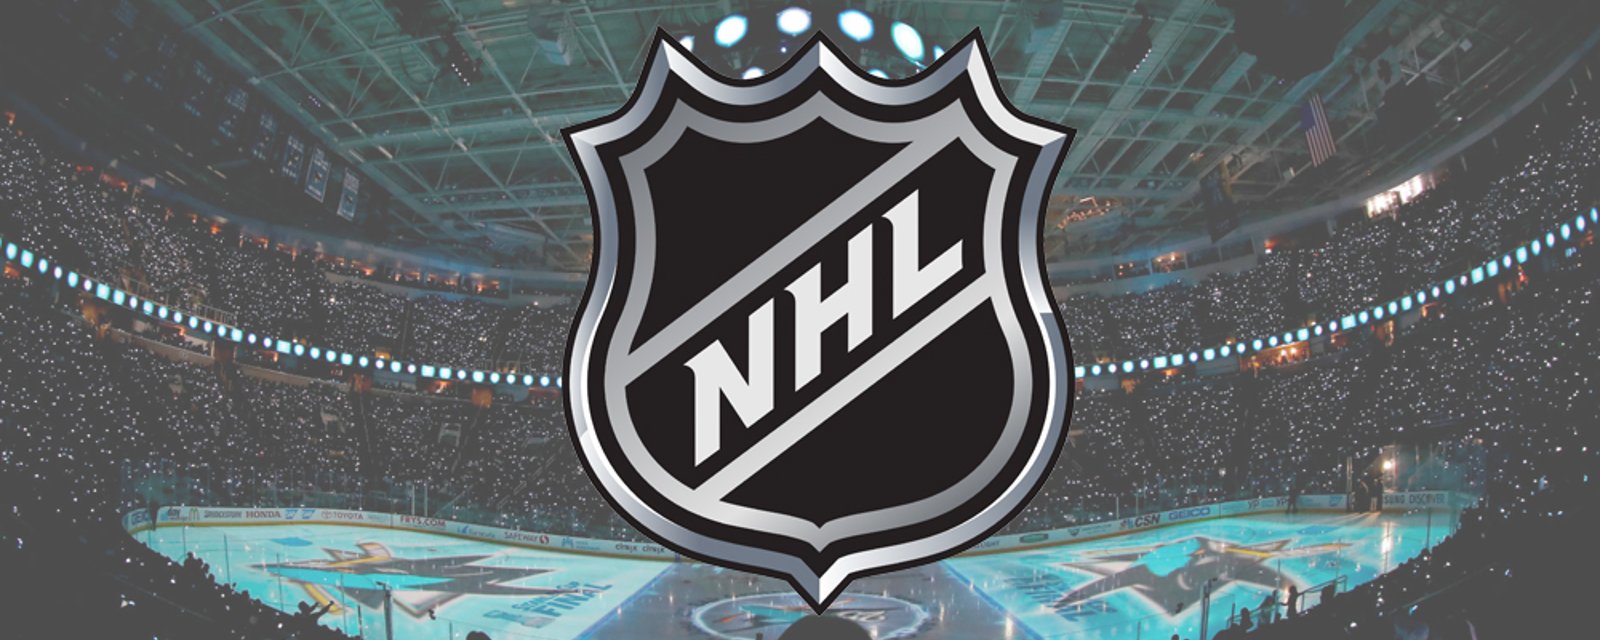 NHL games cancelled due to coronavirus fears